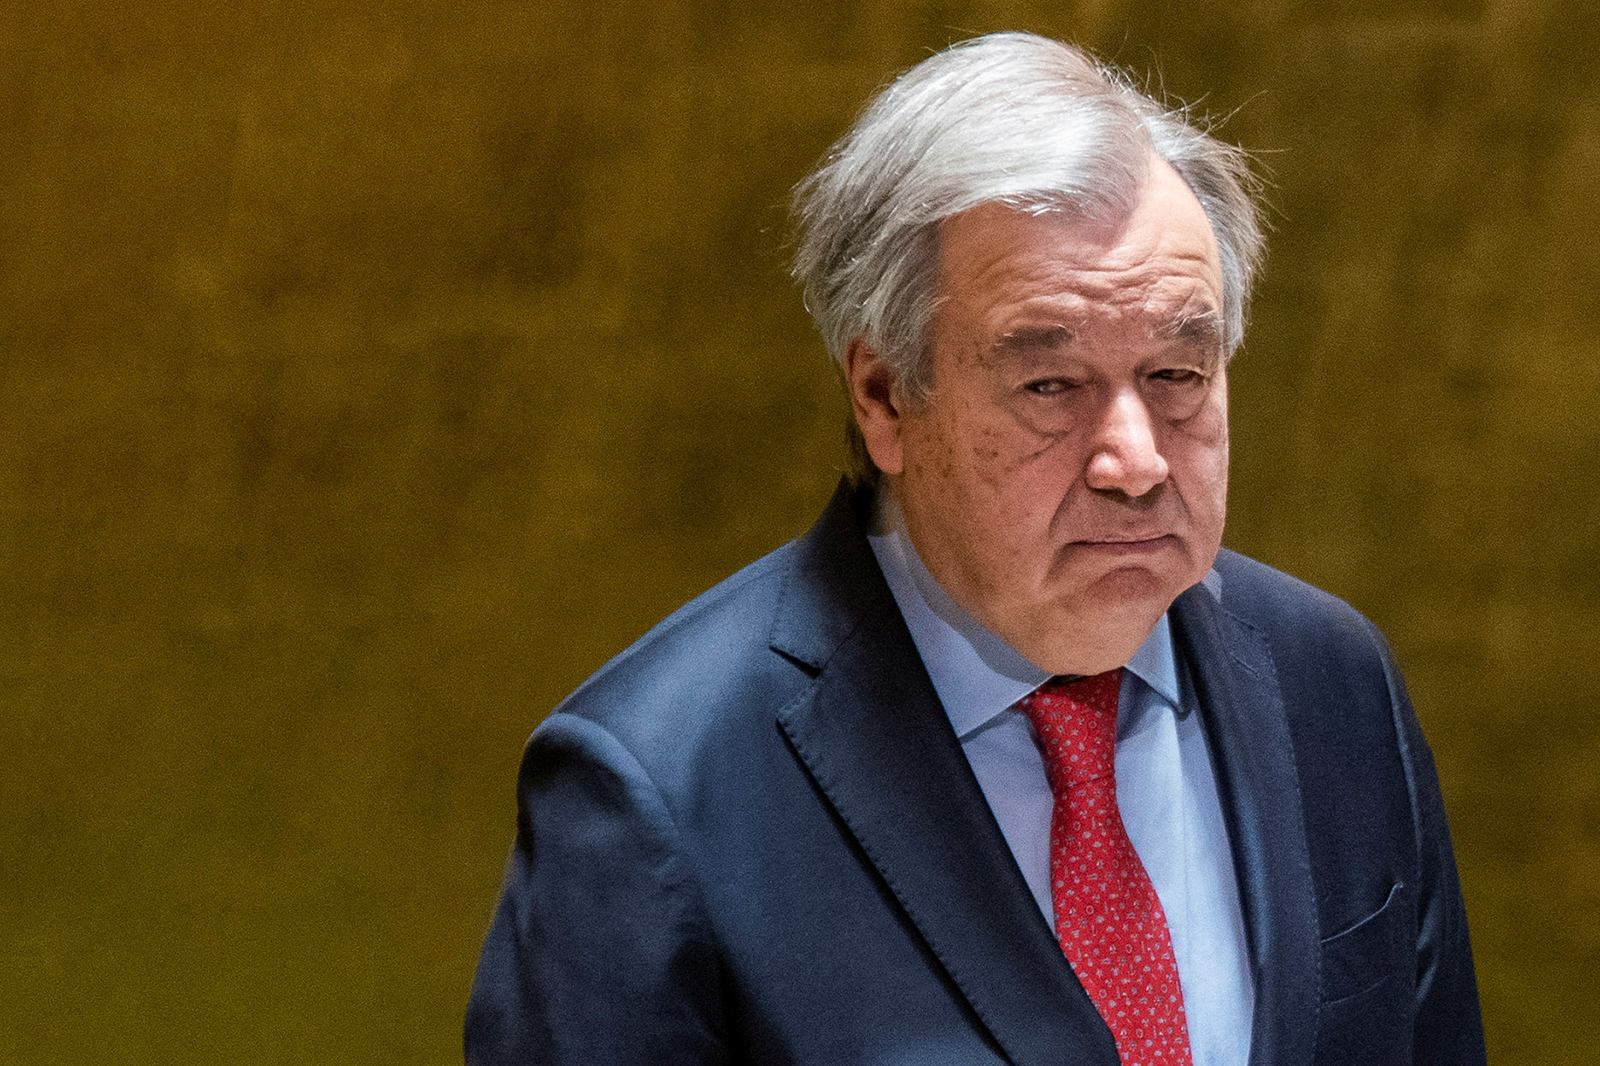 UN Secretary General António Guterres attends a minute of silence for the victims of the earthquake in Turkey and Syria during the 58th plenary meeting at the United Nations headquarters in New York. 